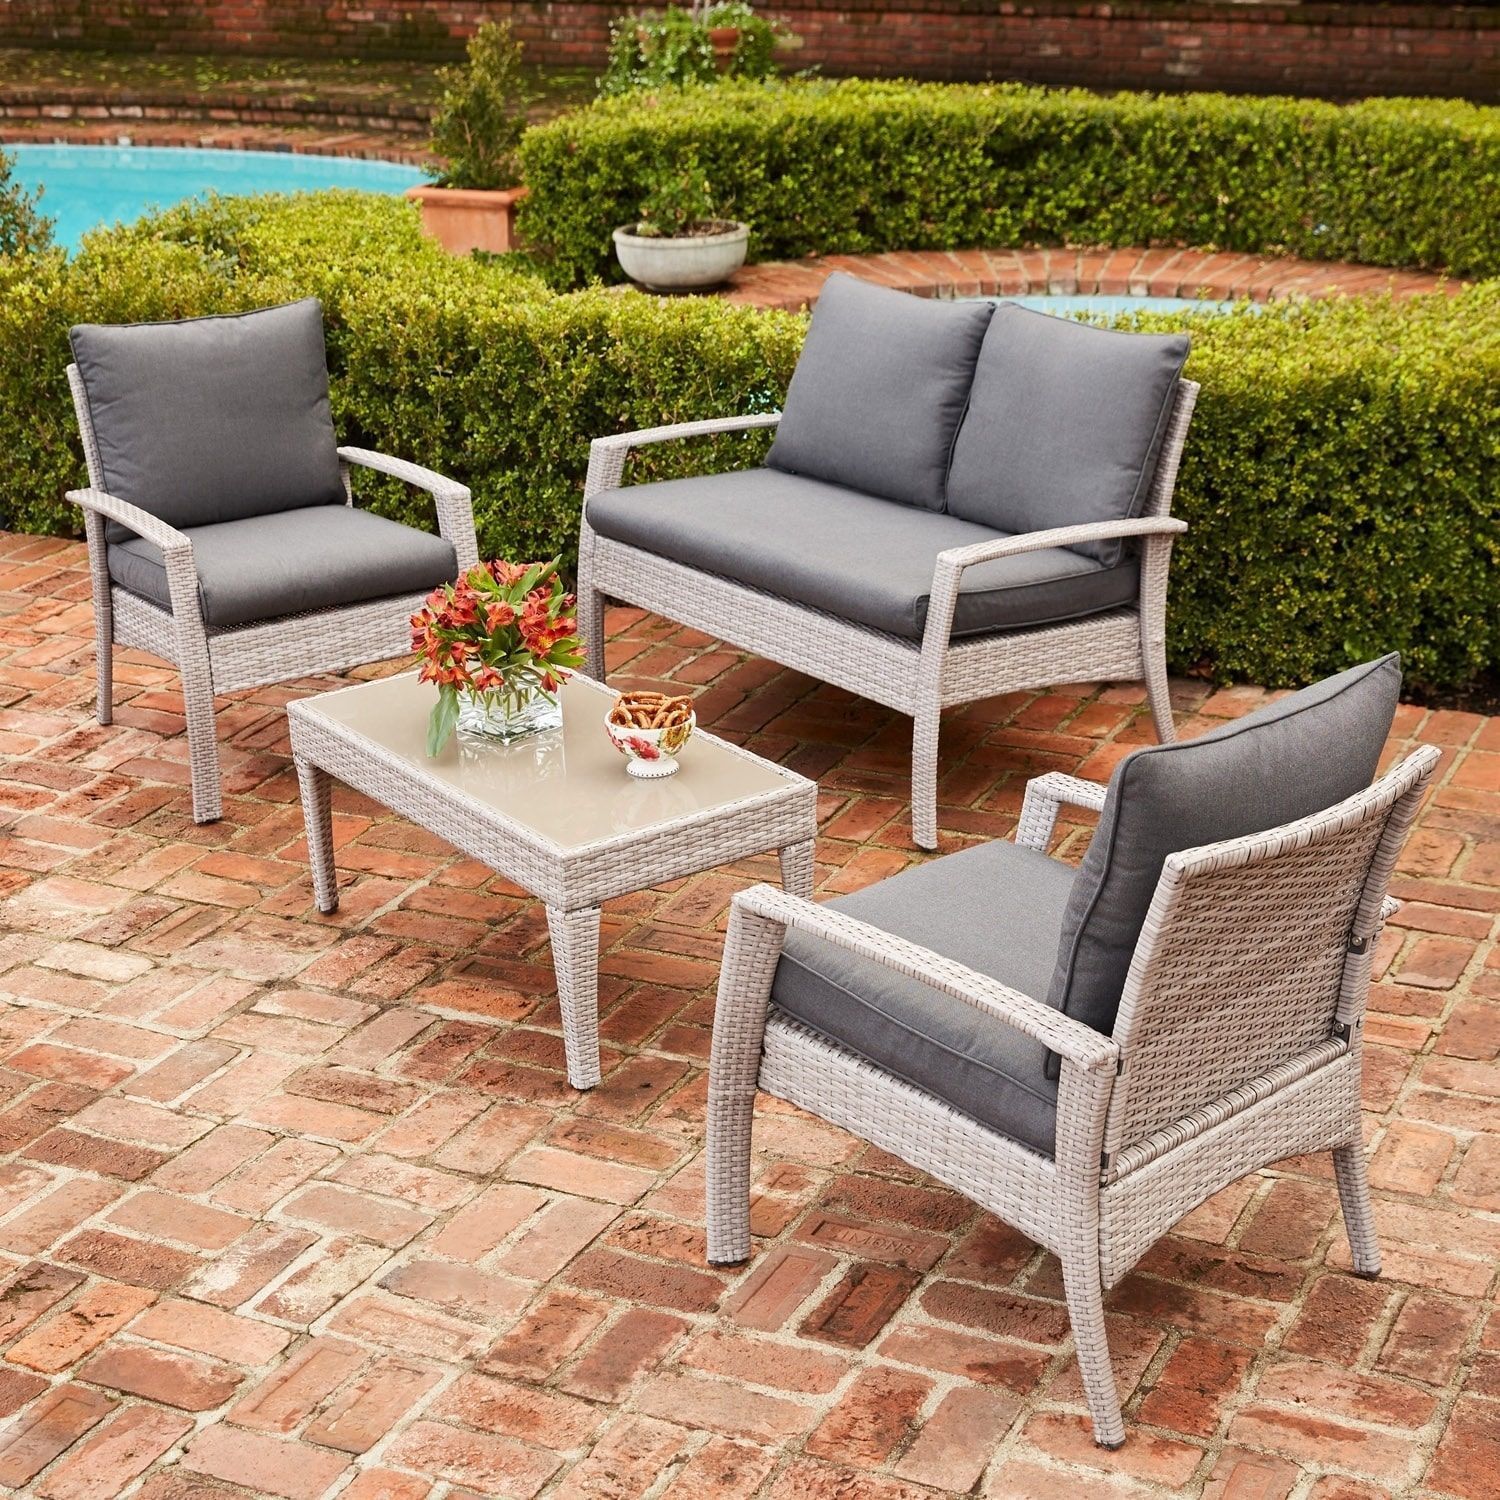 Urban Space Outdoor 4 Piece Wicker Furniture Seating Set With Loveseat Pertaining To 4 Piece Wicker Outdoor Seating Sets (View 12 of 15)